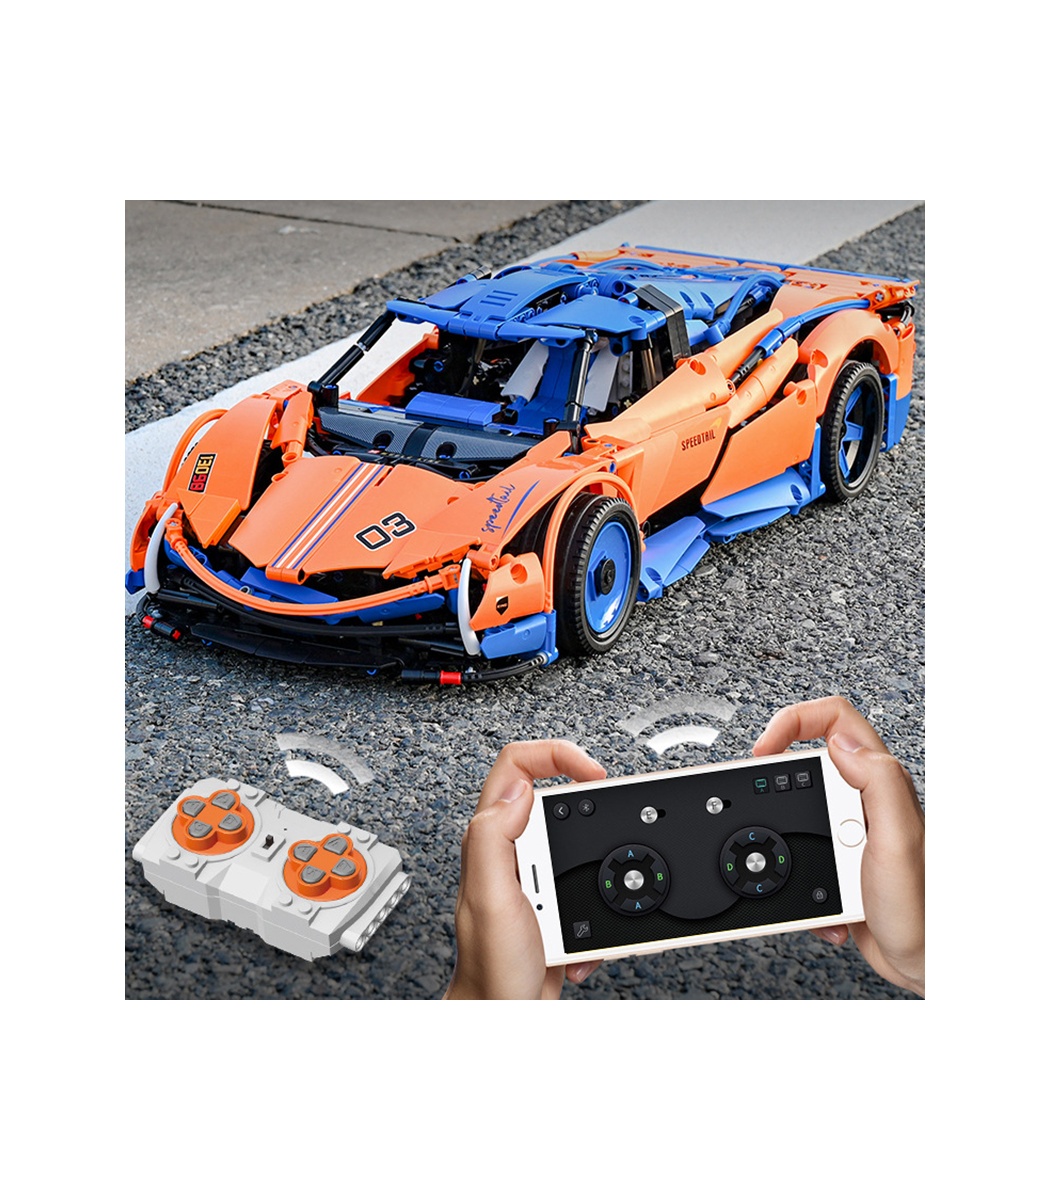 MOULD KING 13098 Speedtail Racing Car Supercar Remote Control